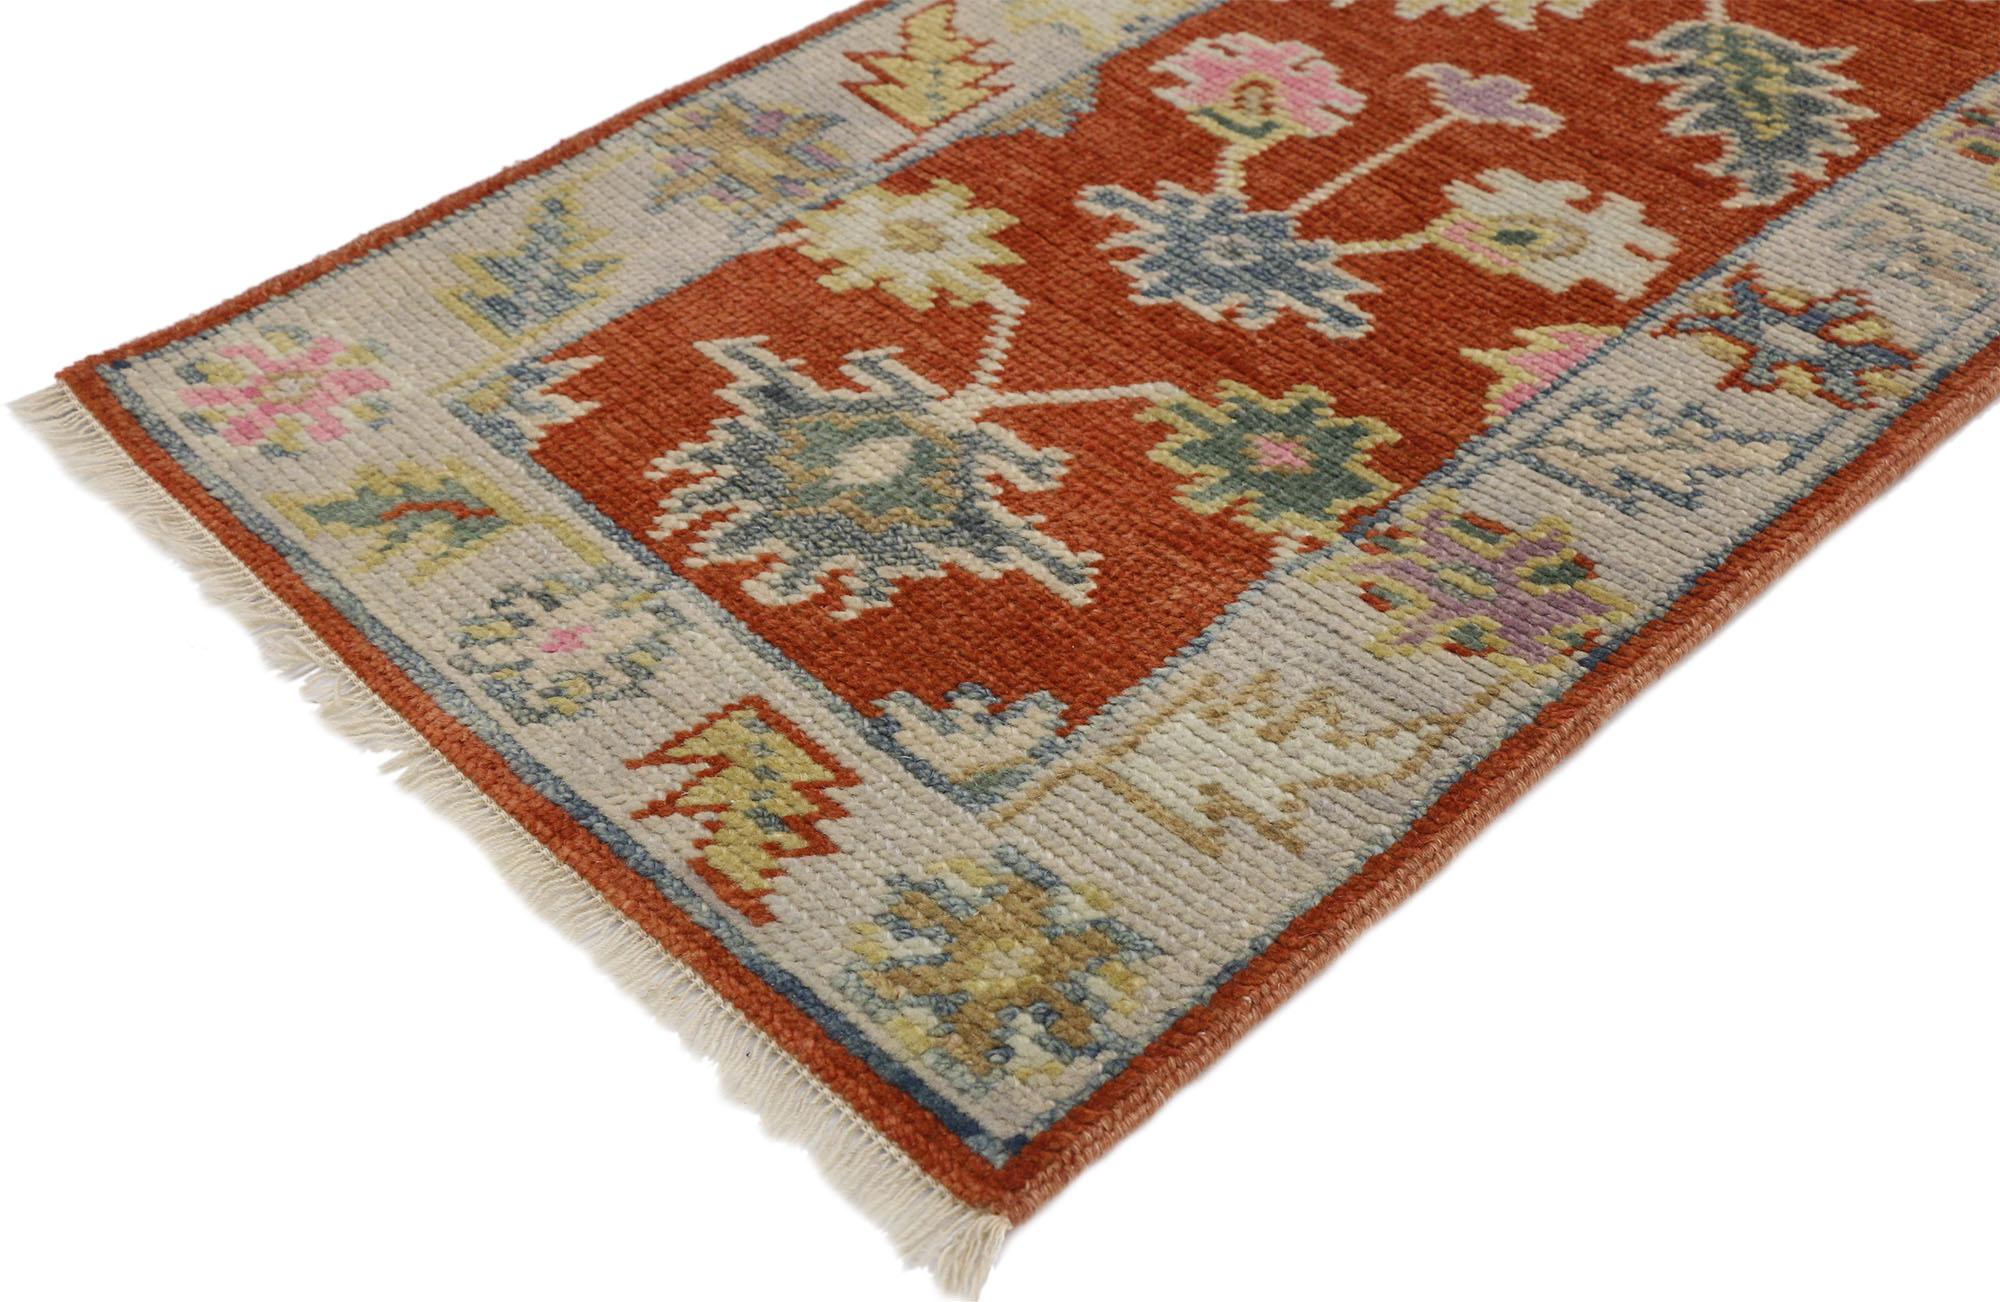 30493, new contemporary colorful Oushak accent rug for entryway, foyer, or kitchen. This hand knotted wool contemporary Oushak accent rug features an all-over colorful geometric pattern composed of blooming palmettes, stylized flowers, and organic